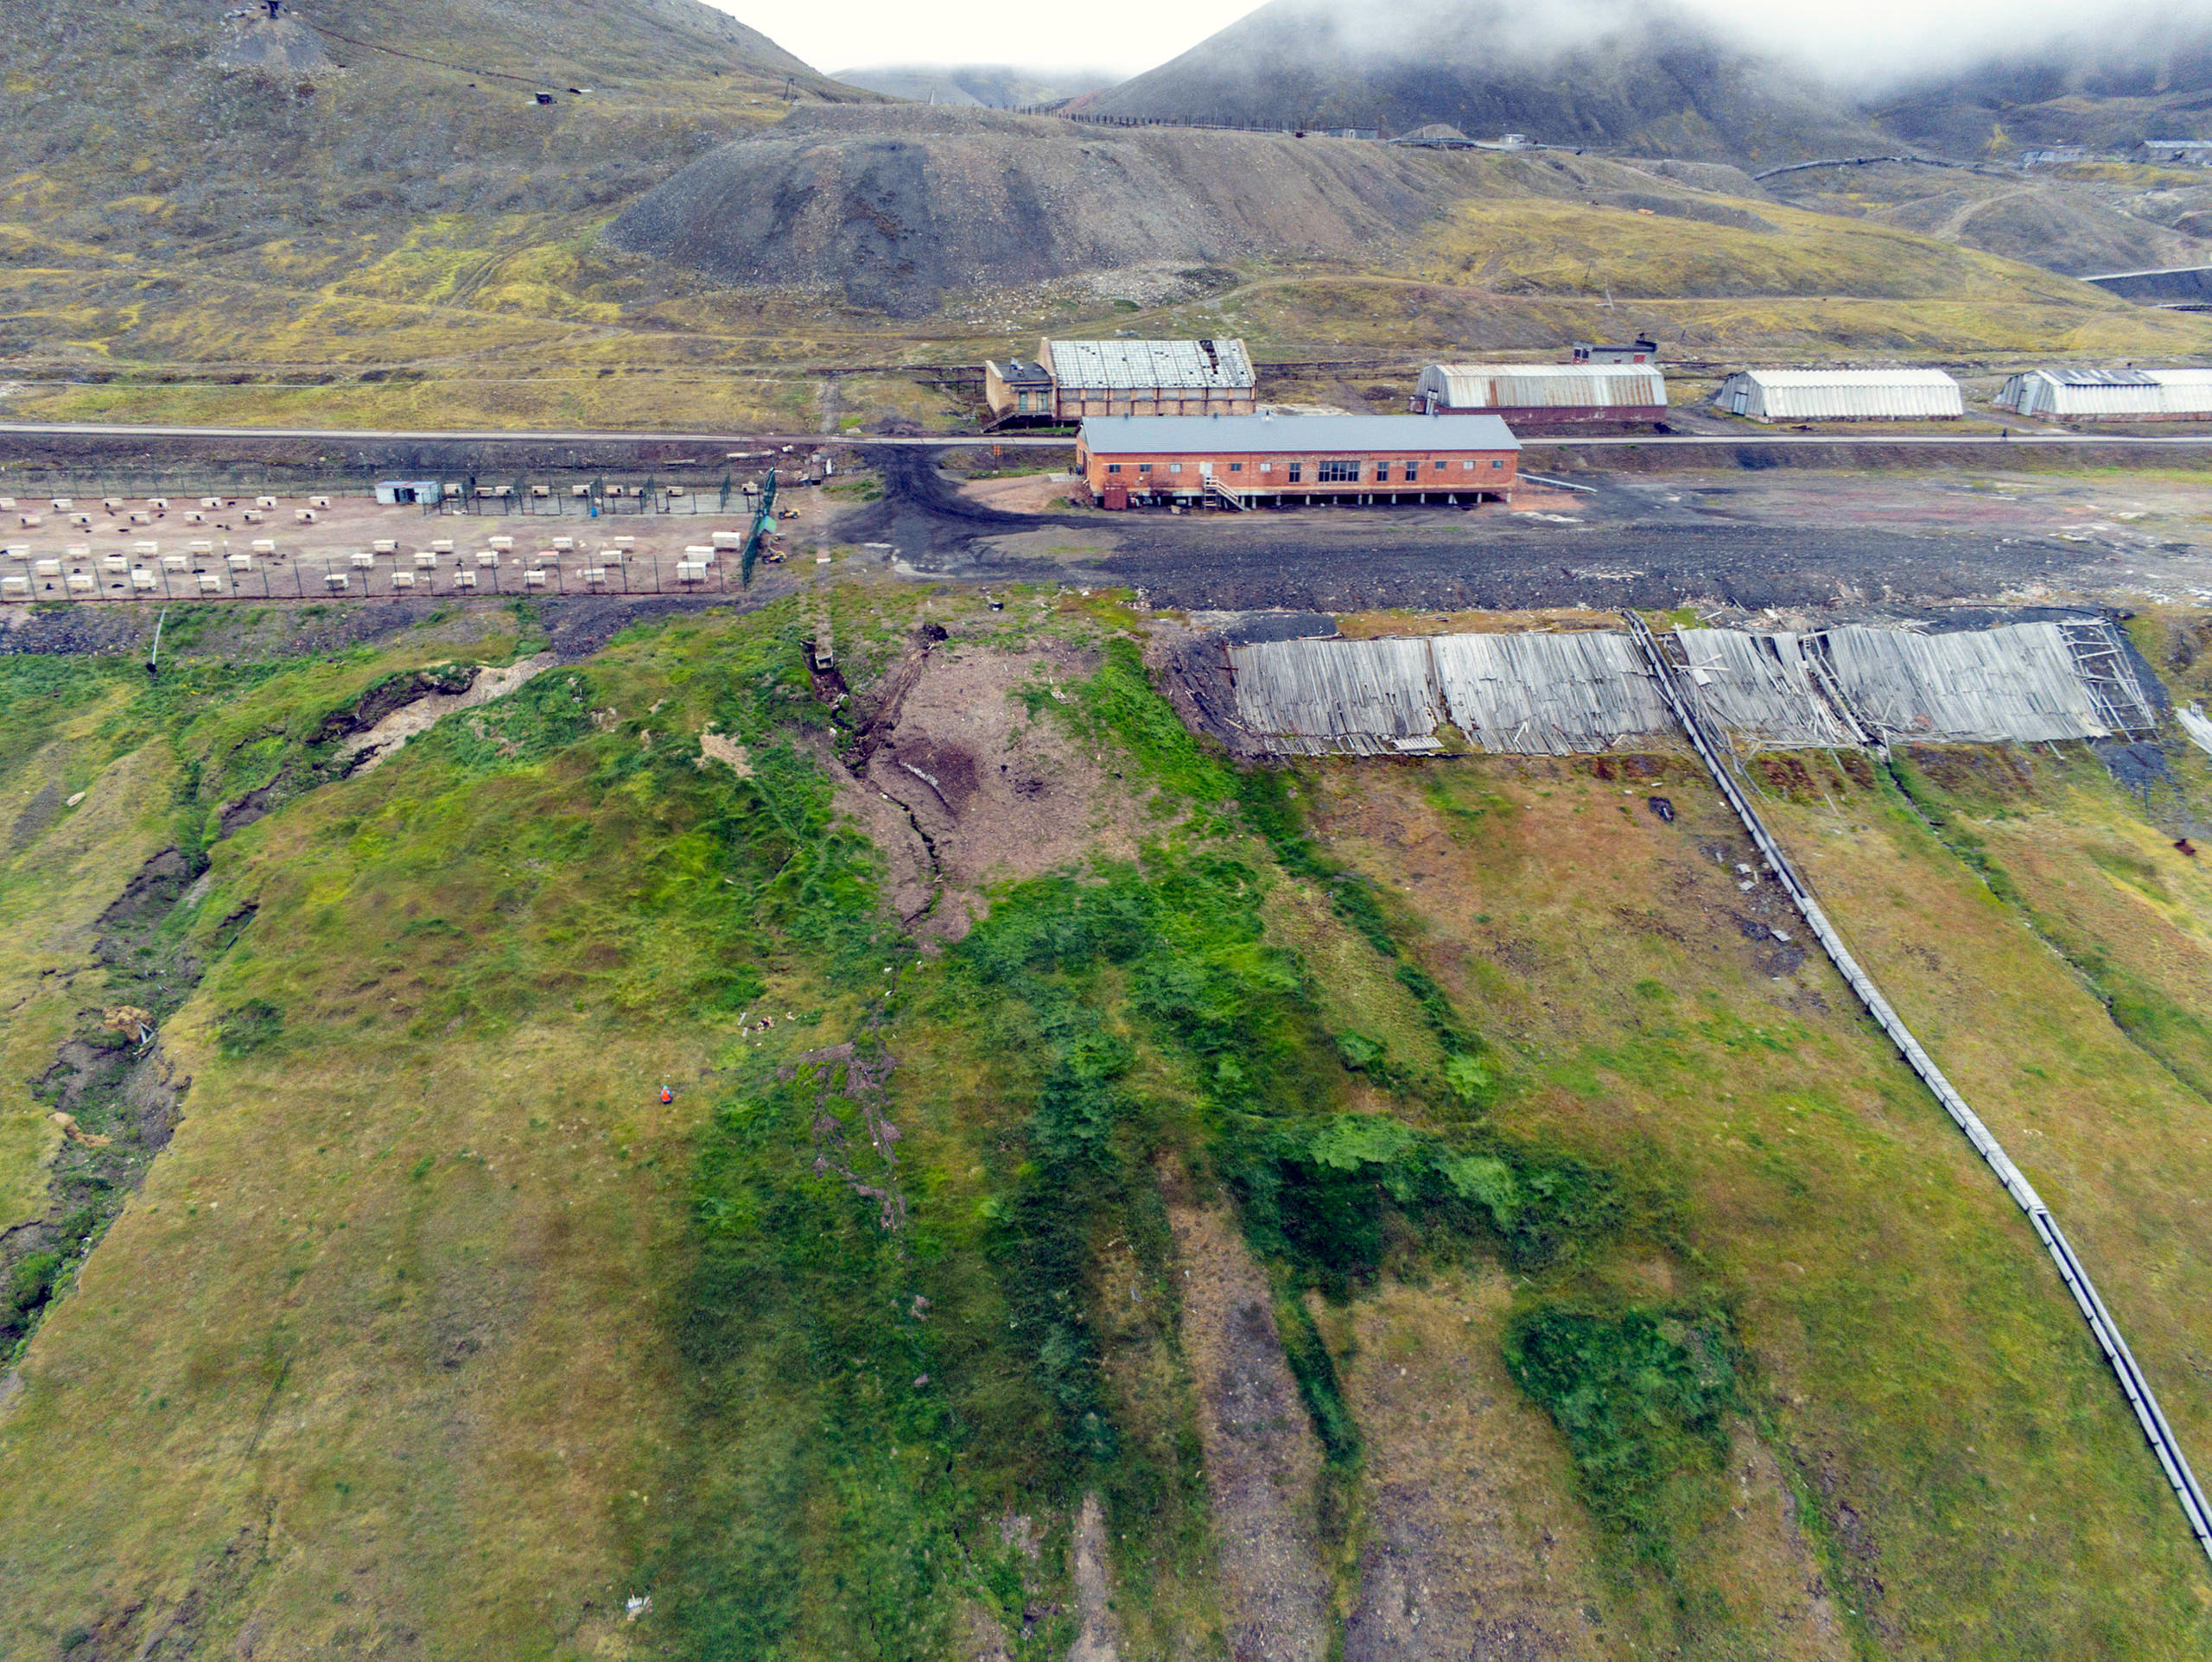 View of our sampling site in Barentsburg, with the disturbed and nutrient rich soil underneath the dog yard on the left.